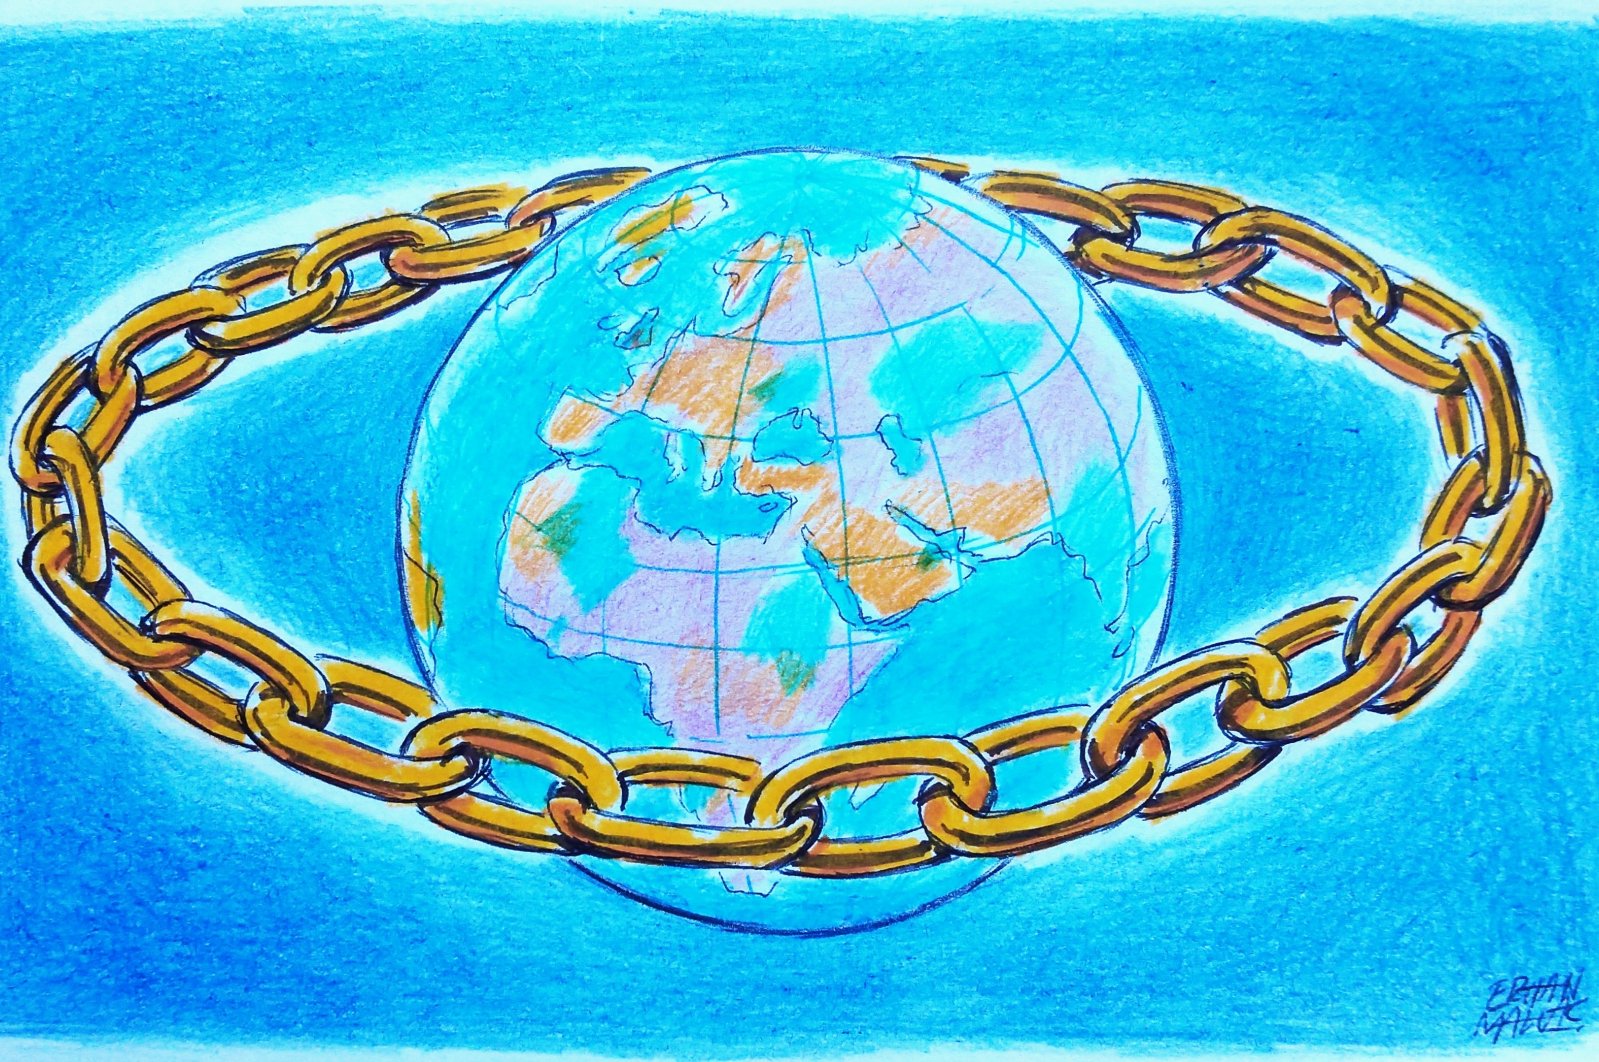 &quot;It is possible to strengthen Türkiye&#039;s position in the global value chain and achieve high-added value with traditional Turkish sectors.&quot; (Illustration by Erhan Yalvaç)